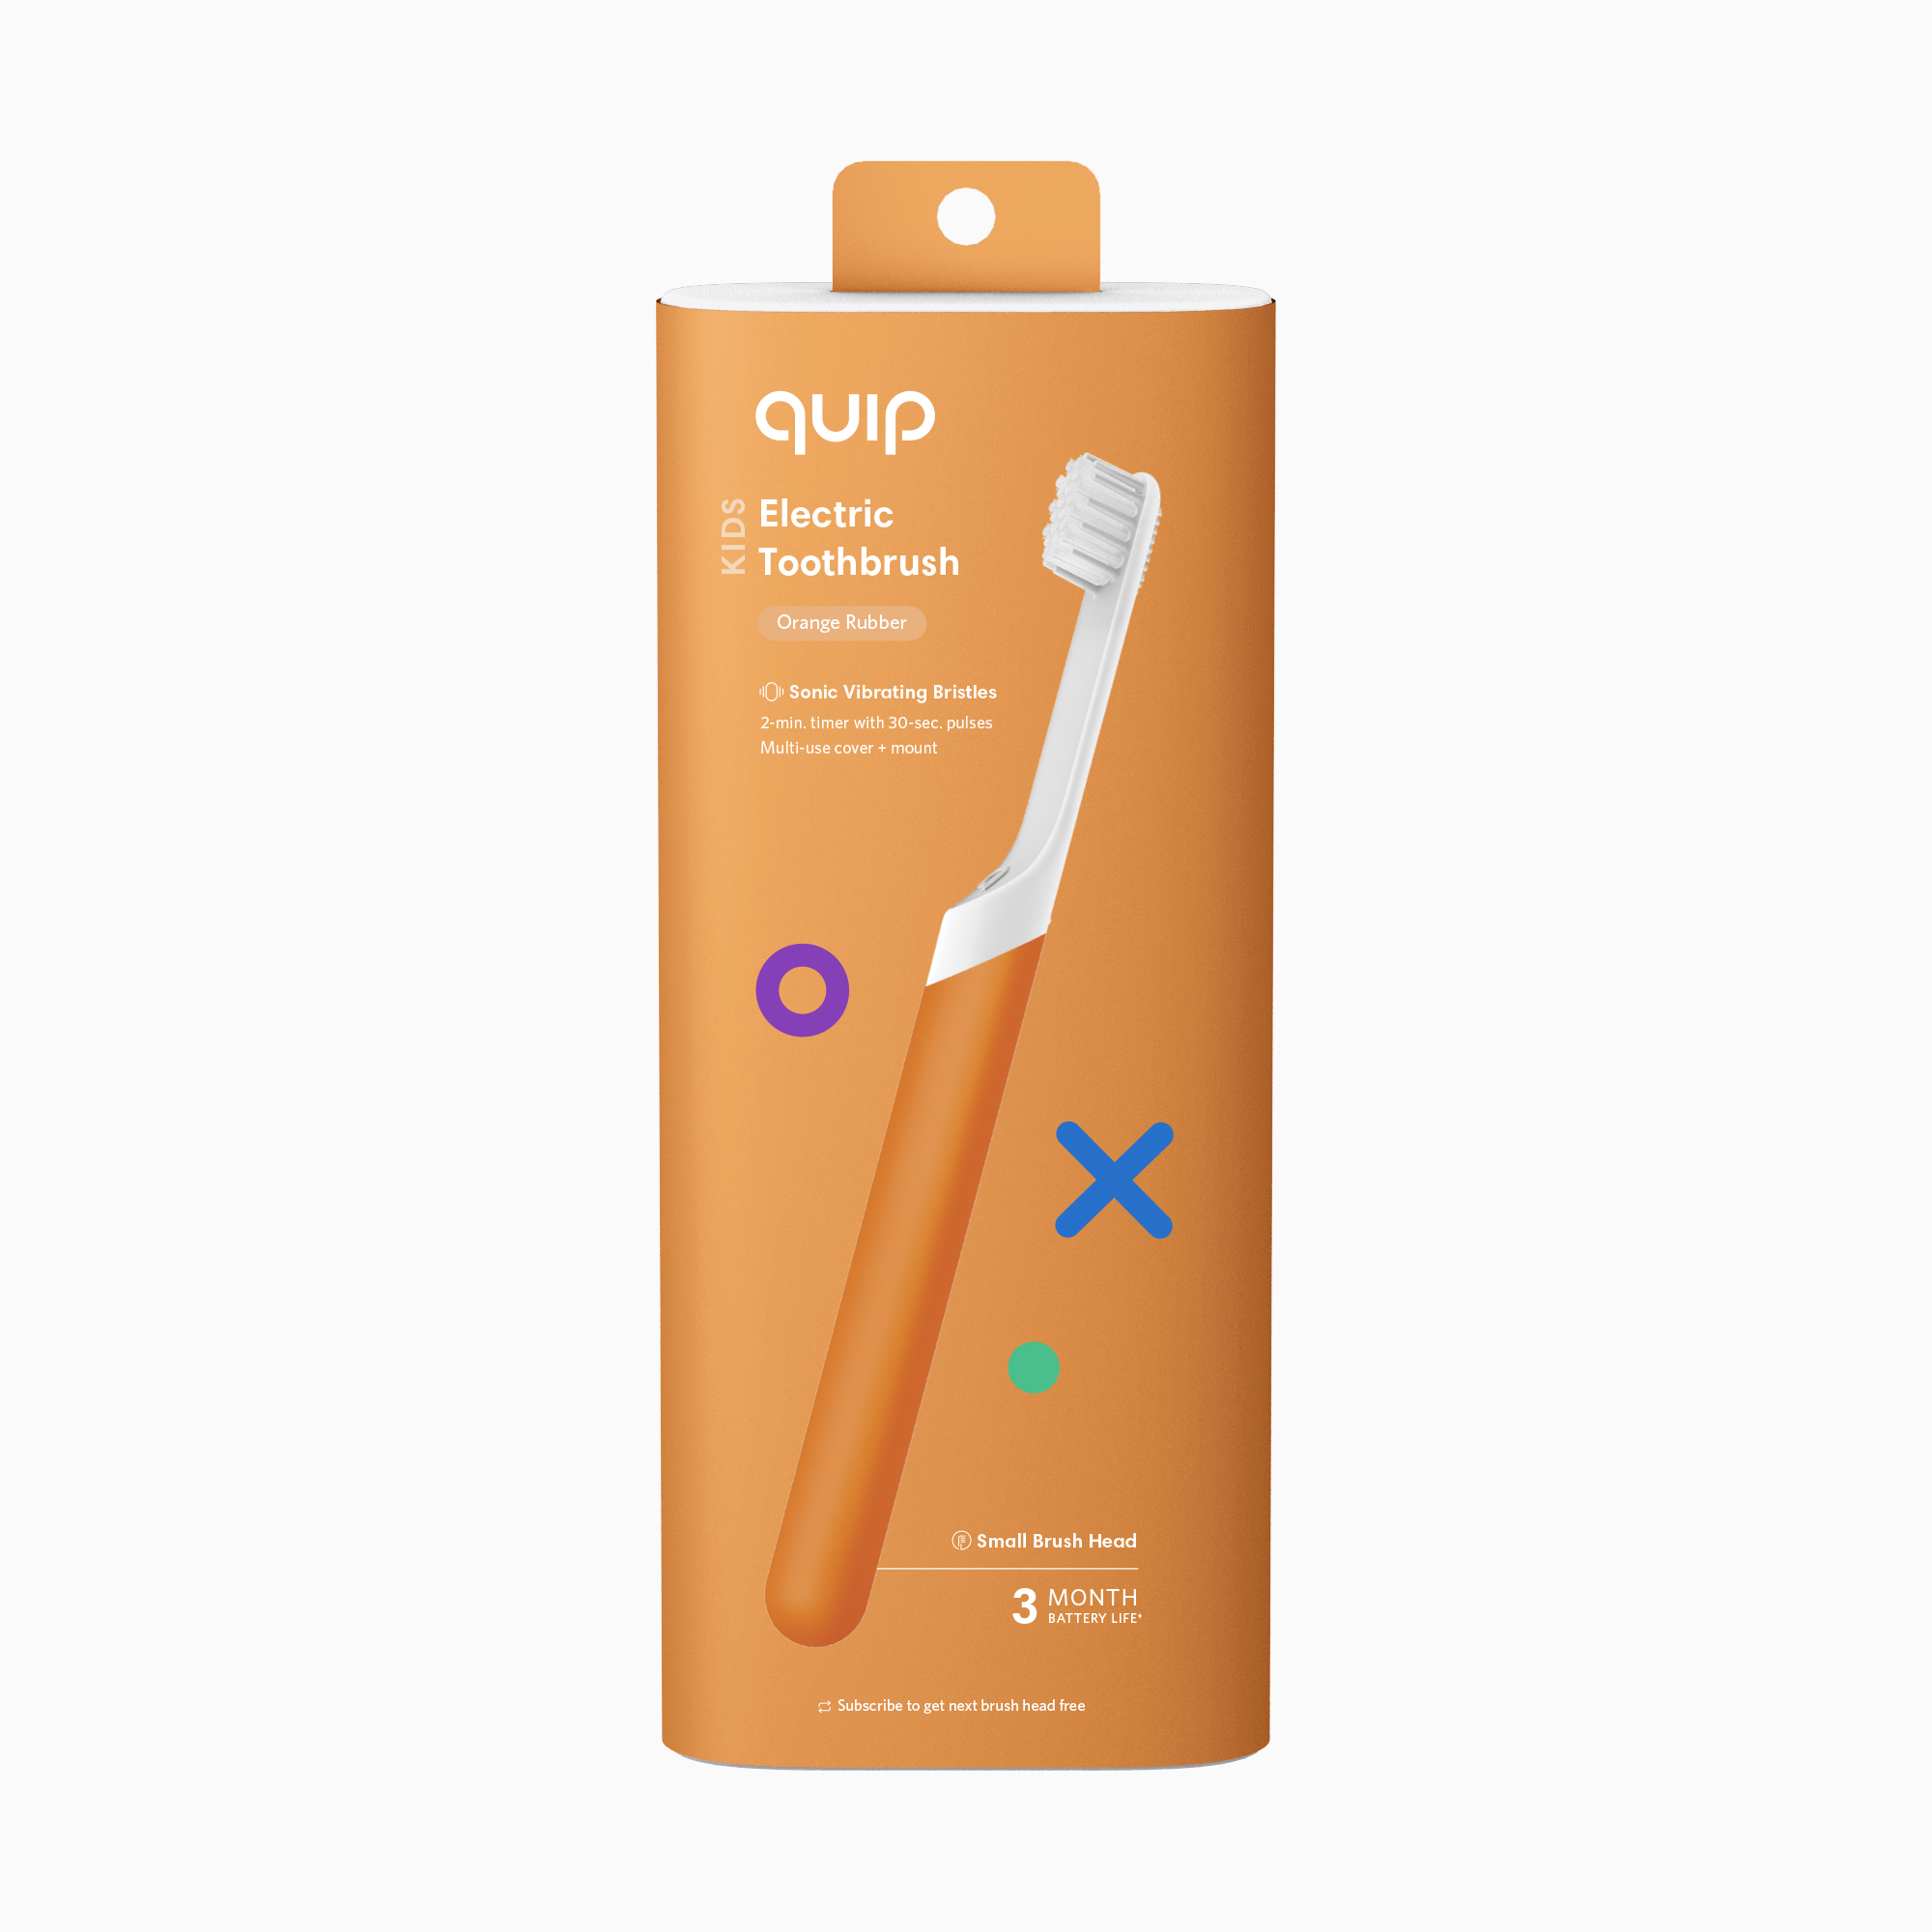 How to open a quip toothbrush